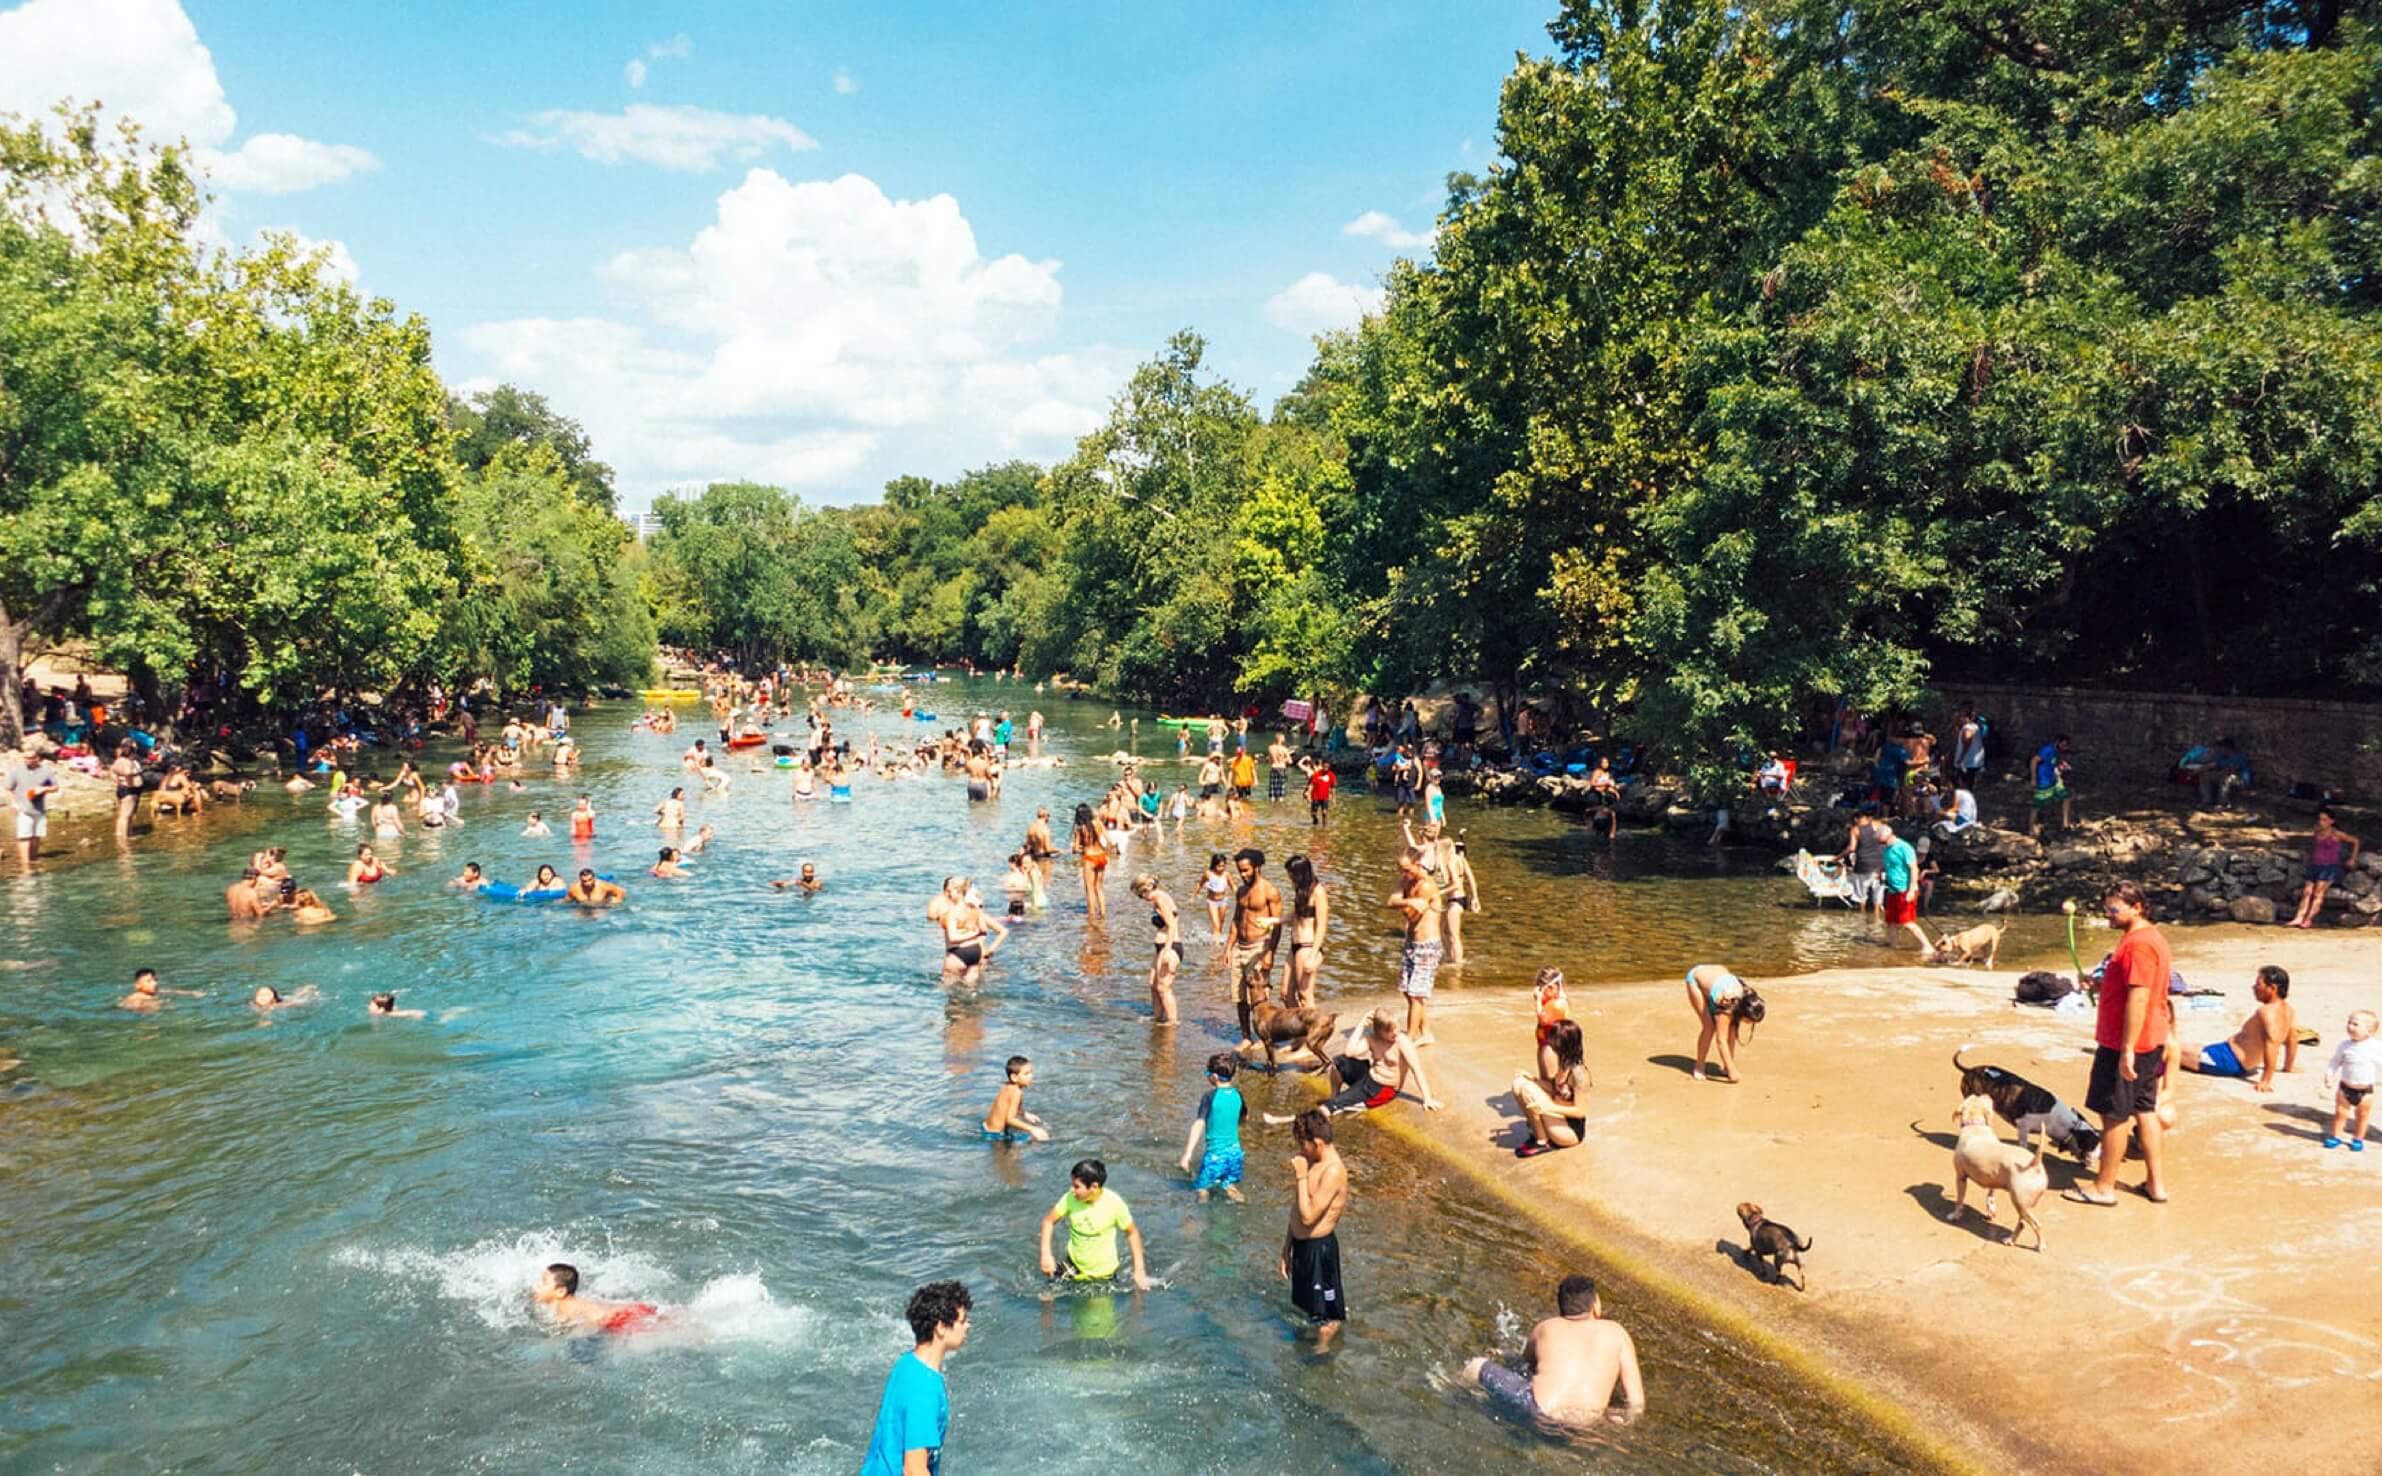 Dozens of people swimming and playing in Barton Springs Pool in Austin